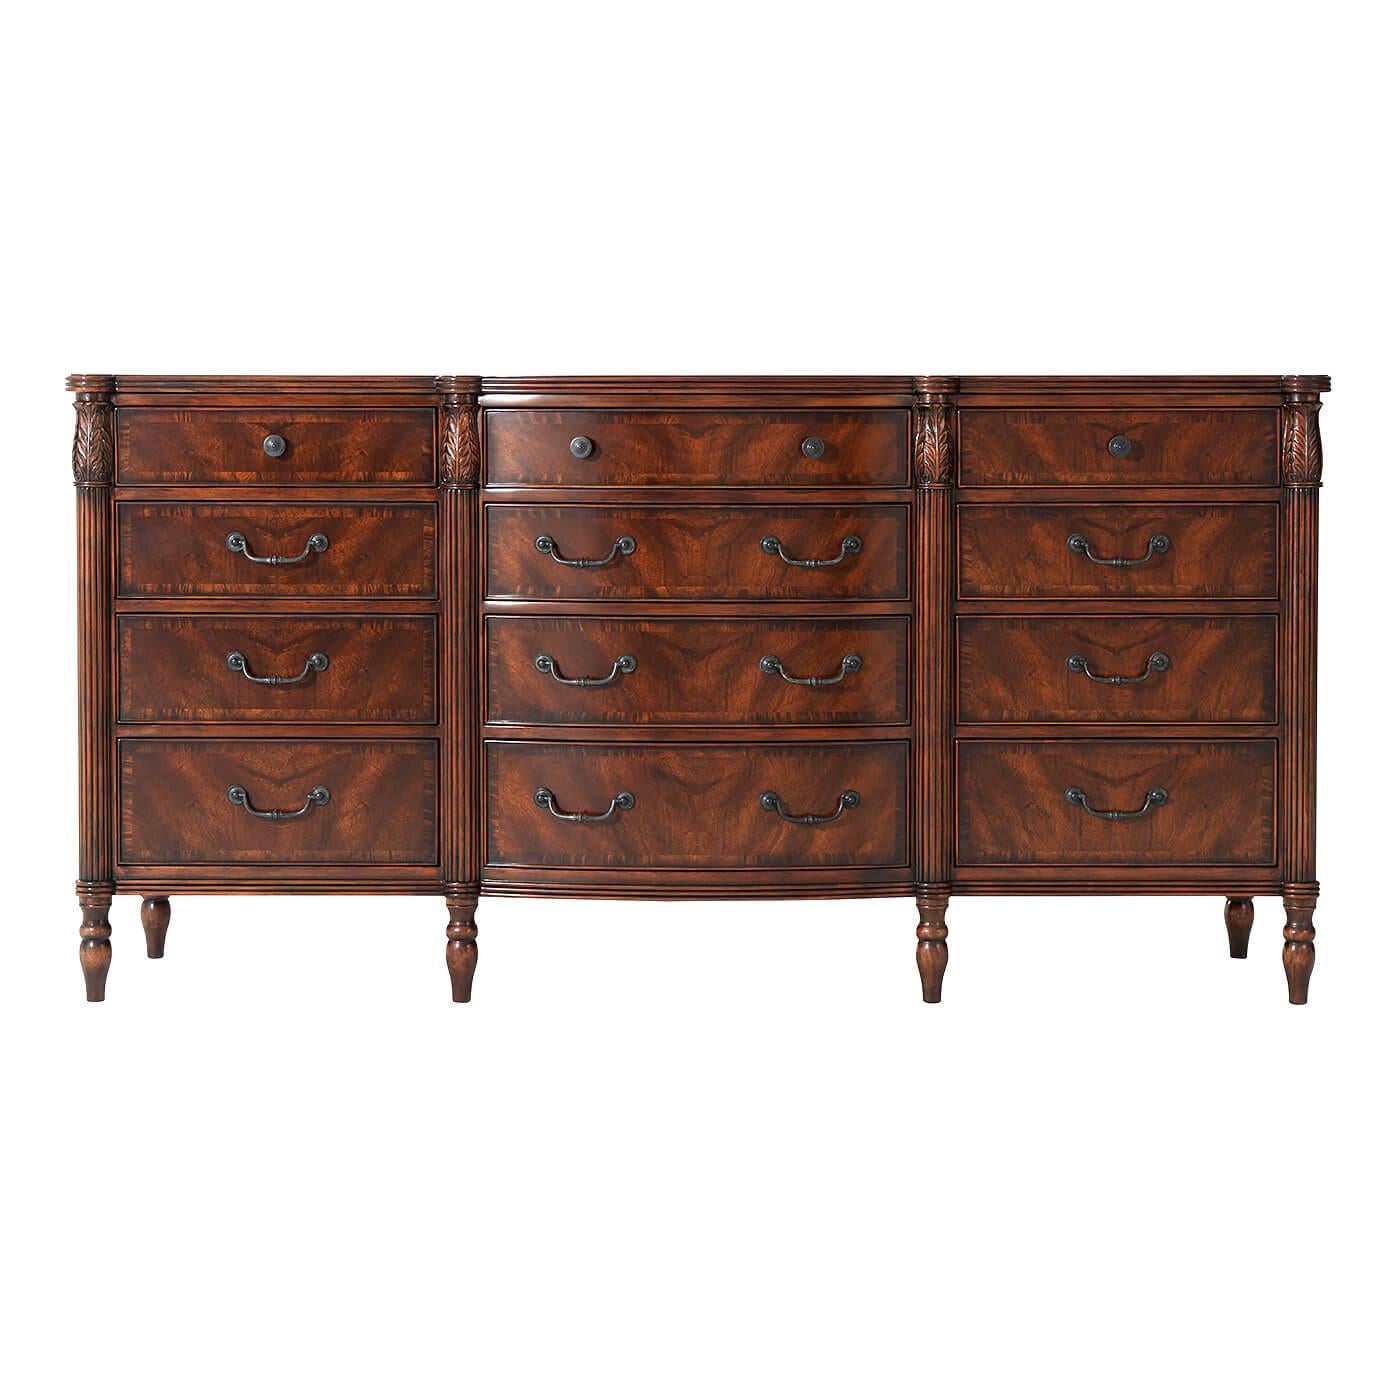 A mahogany and figured mahogany veneered dresser, the reeded edge top with protruding corners and a central bowfront with leaf carved and reeded uprights with three frieze drawers and nine further graduated and crossbanded drawers with verdigris